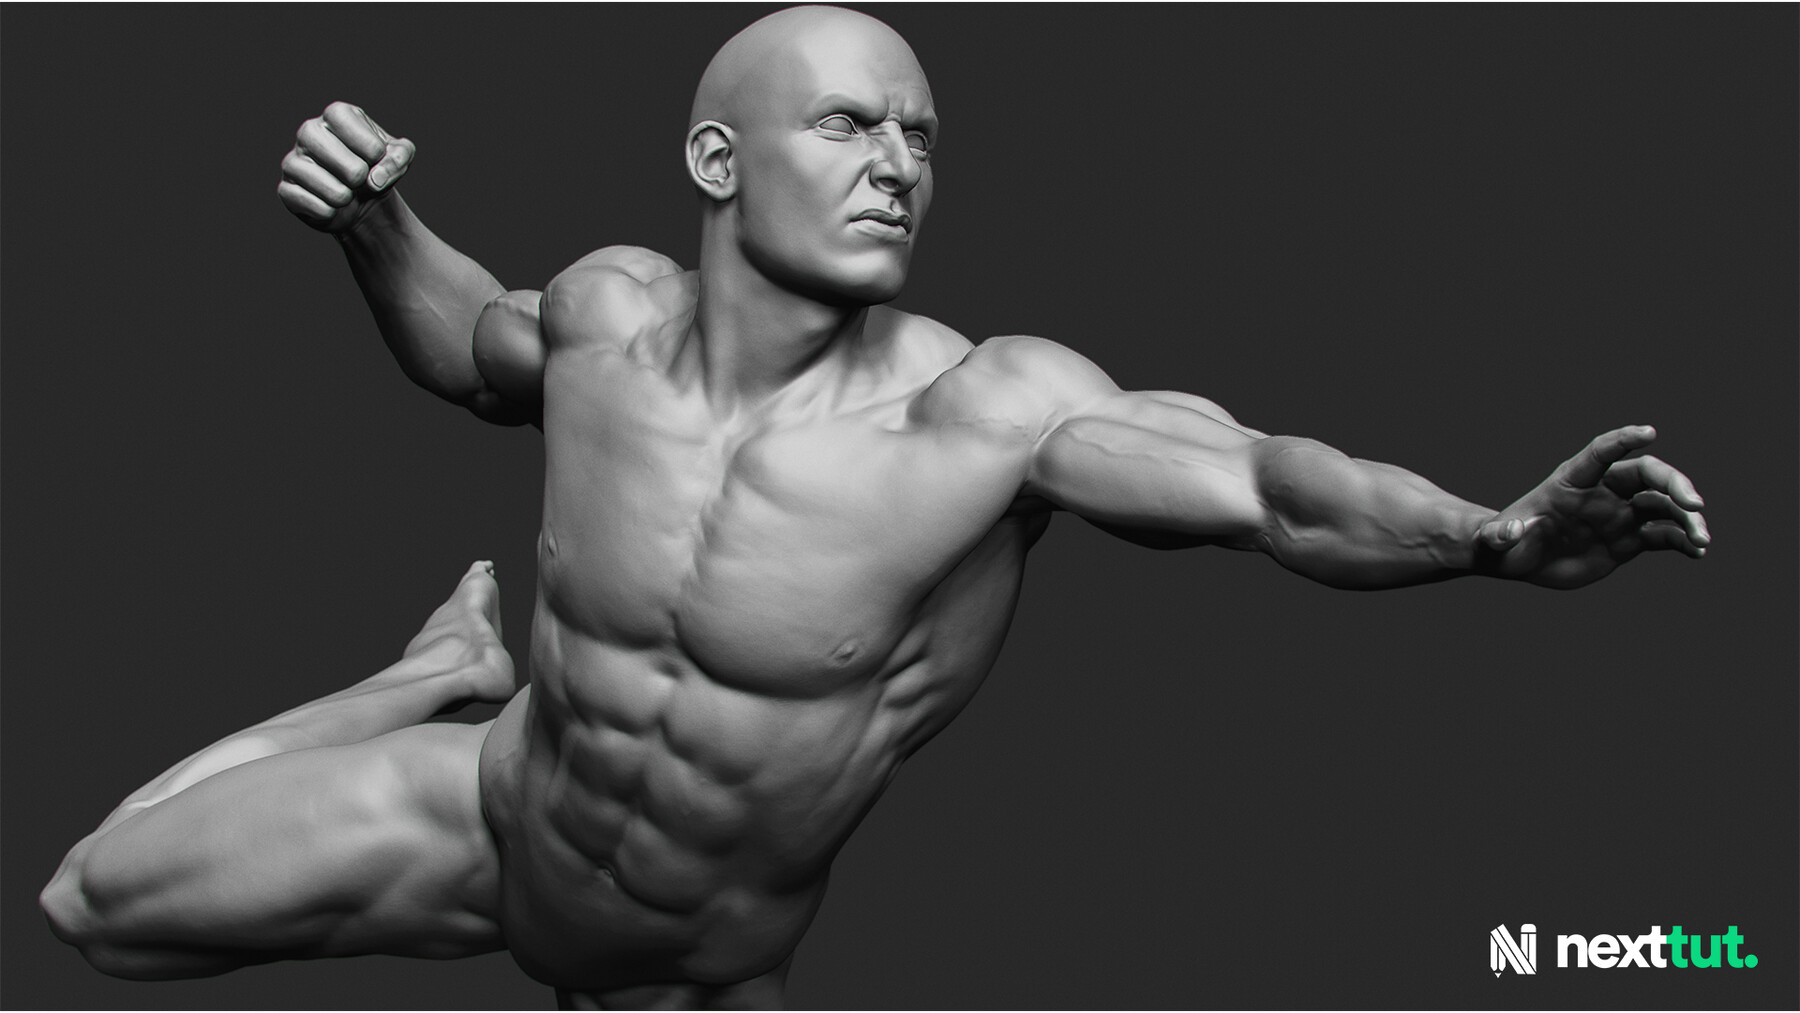 human anatomy for artists using zbrush and photoshop